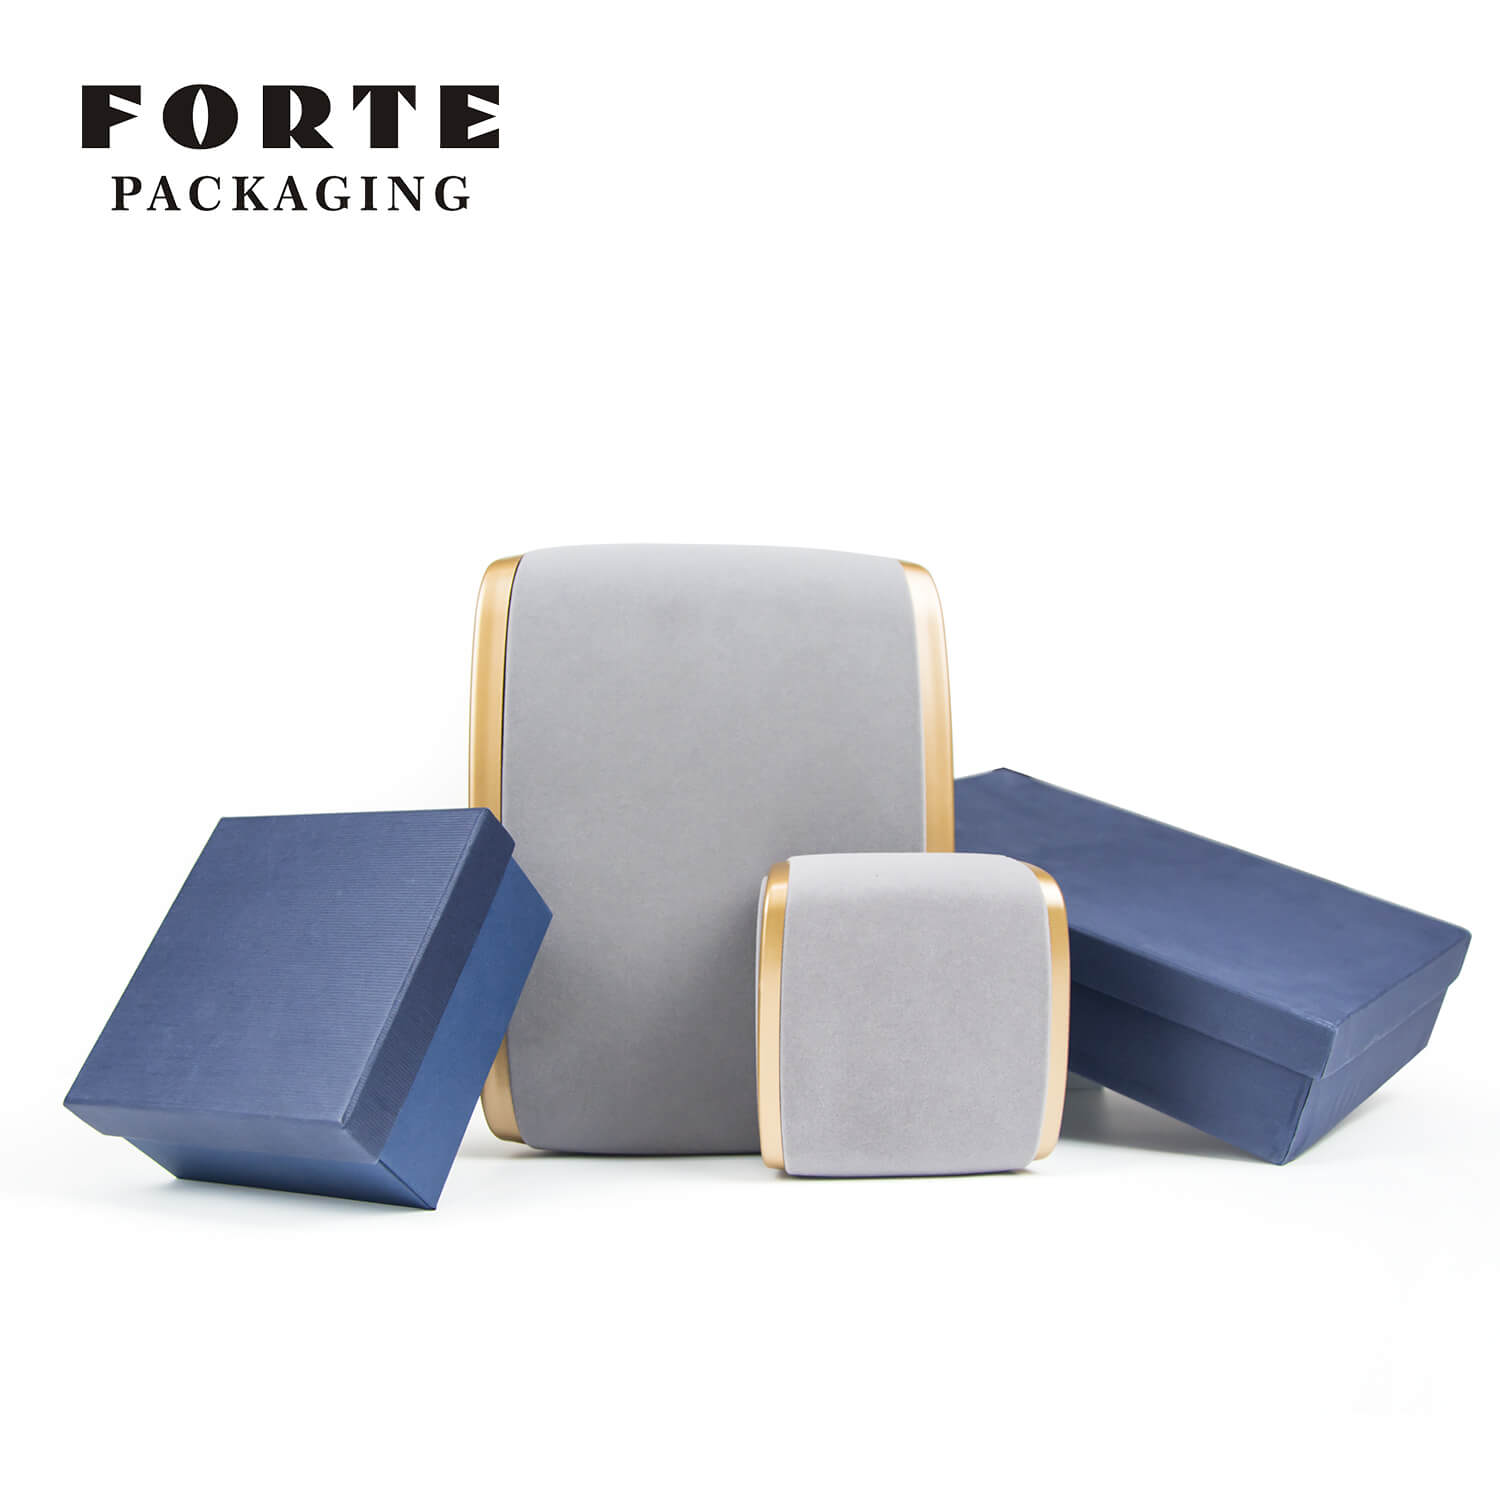 FORTE Stylish Jewelry Packaging display Sofa design pendant necklace Luxury Jewelry Box grey Velvet couple Ring Box with metal edge